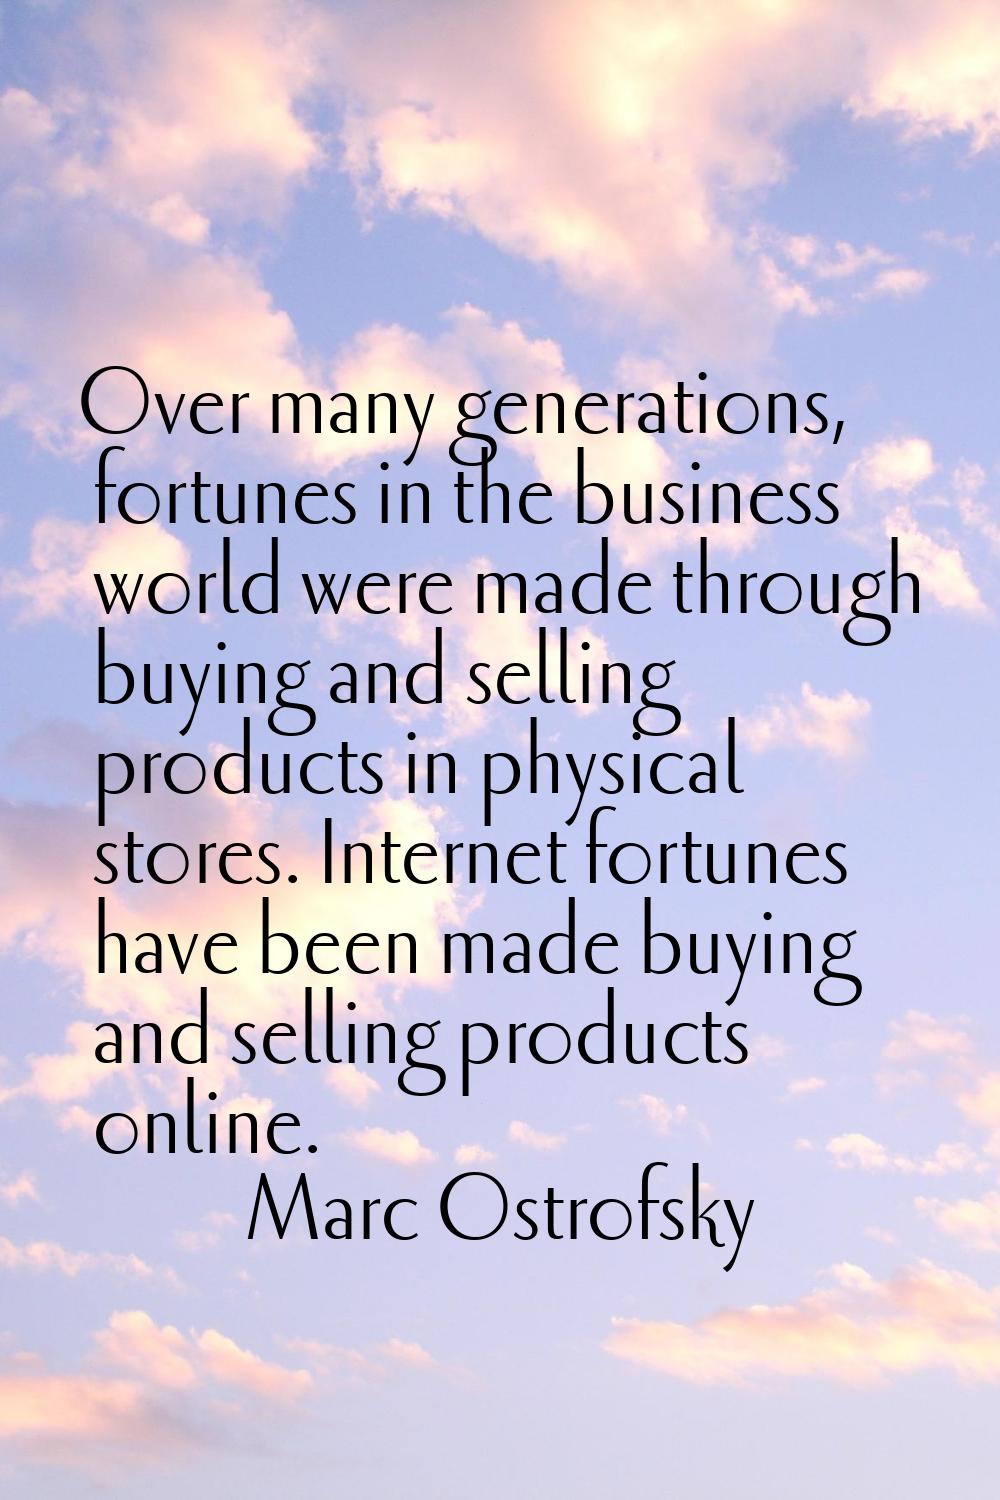 Over many generations, fortunes in the business world were made through buying and selling products